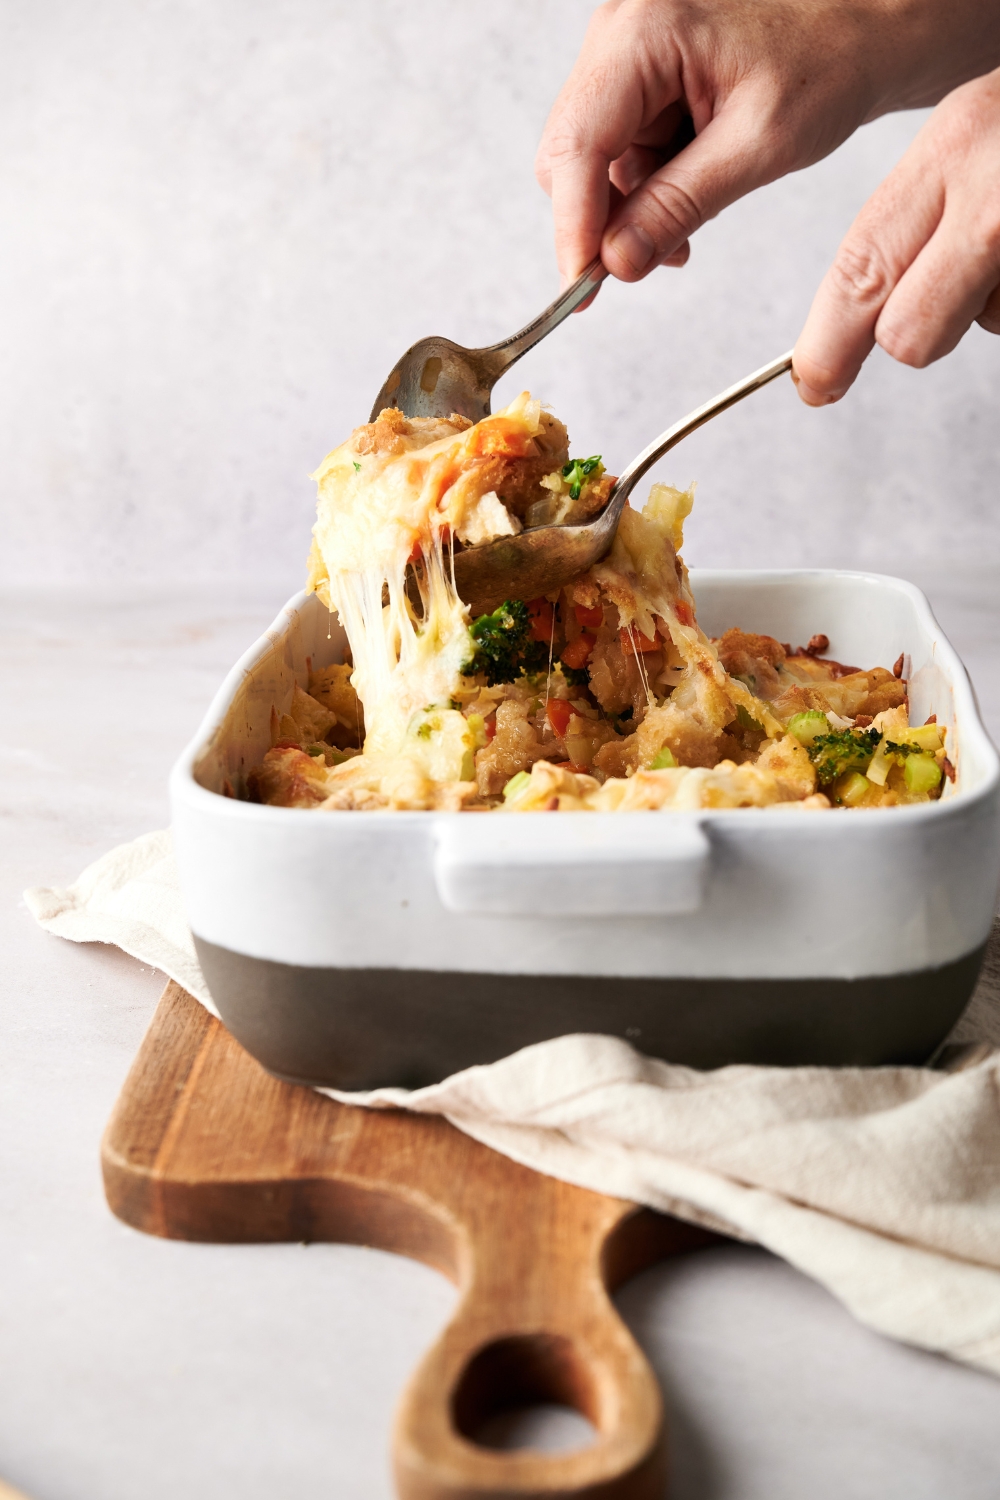 A spoon and fork dishing out a cheesy portion of chicken broccoli stuffing from a white and gray casserole dish.